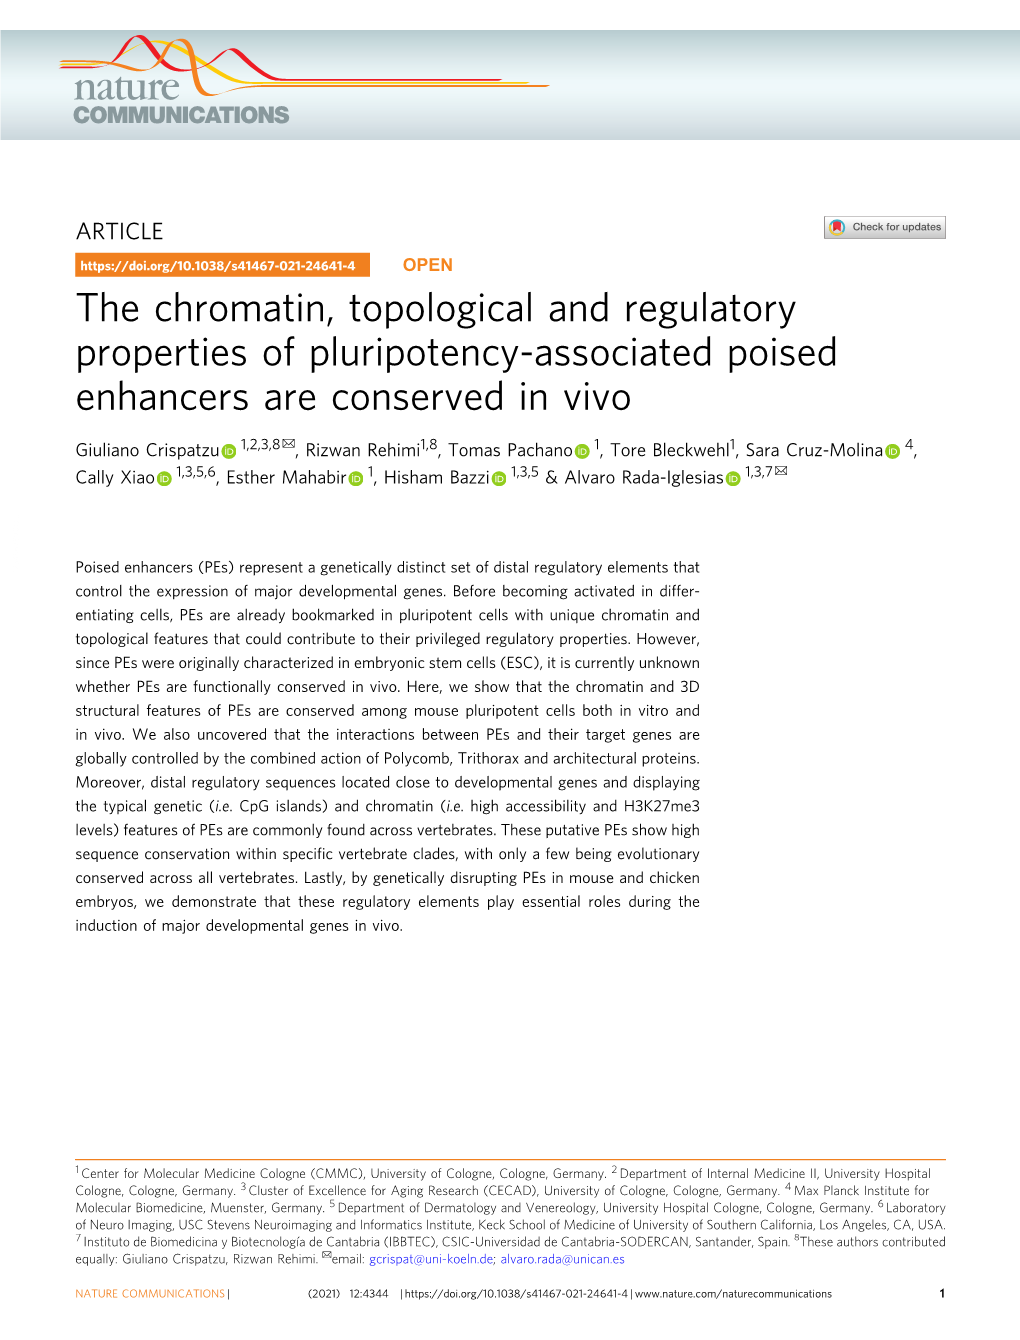 The Chromatin, Topological and Regulatory Properties of Pluripotency-Associated Poised Enhancers Are Conserved in Vivo